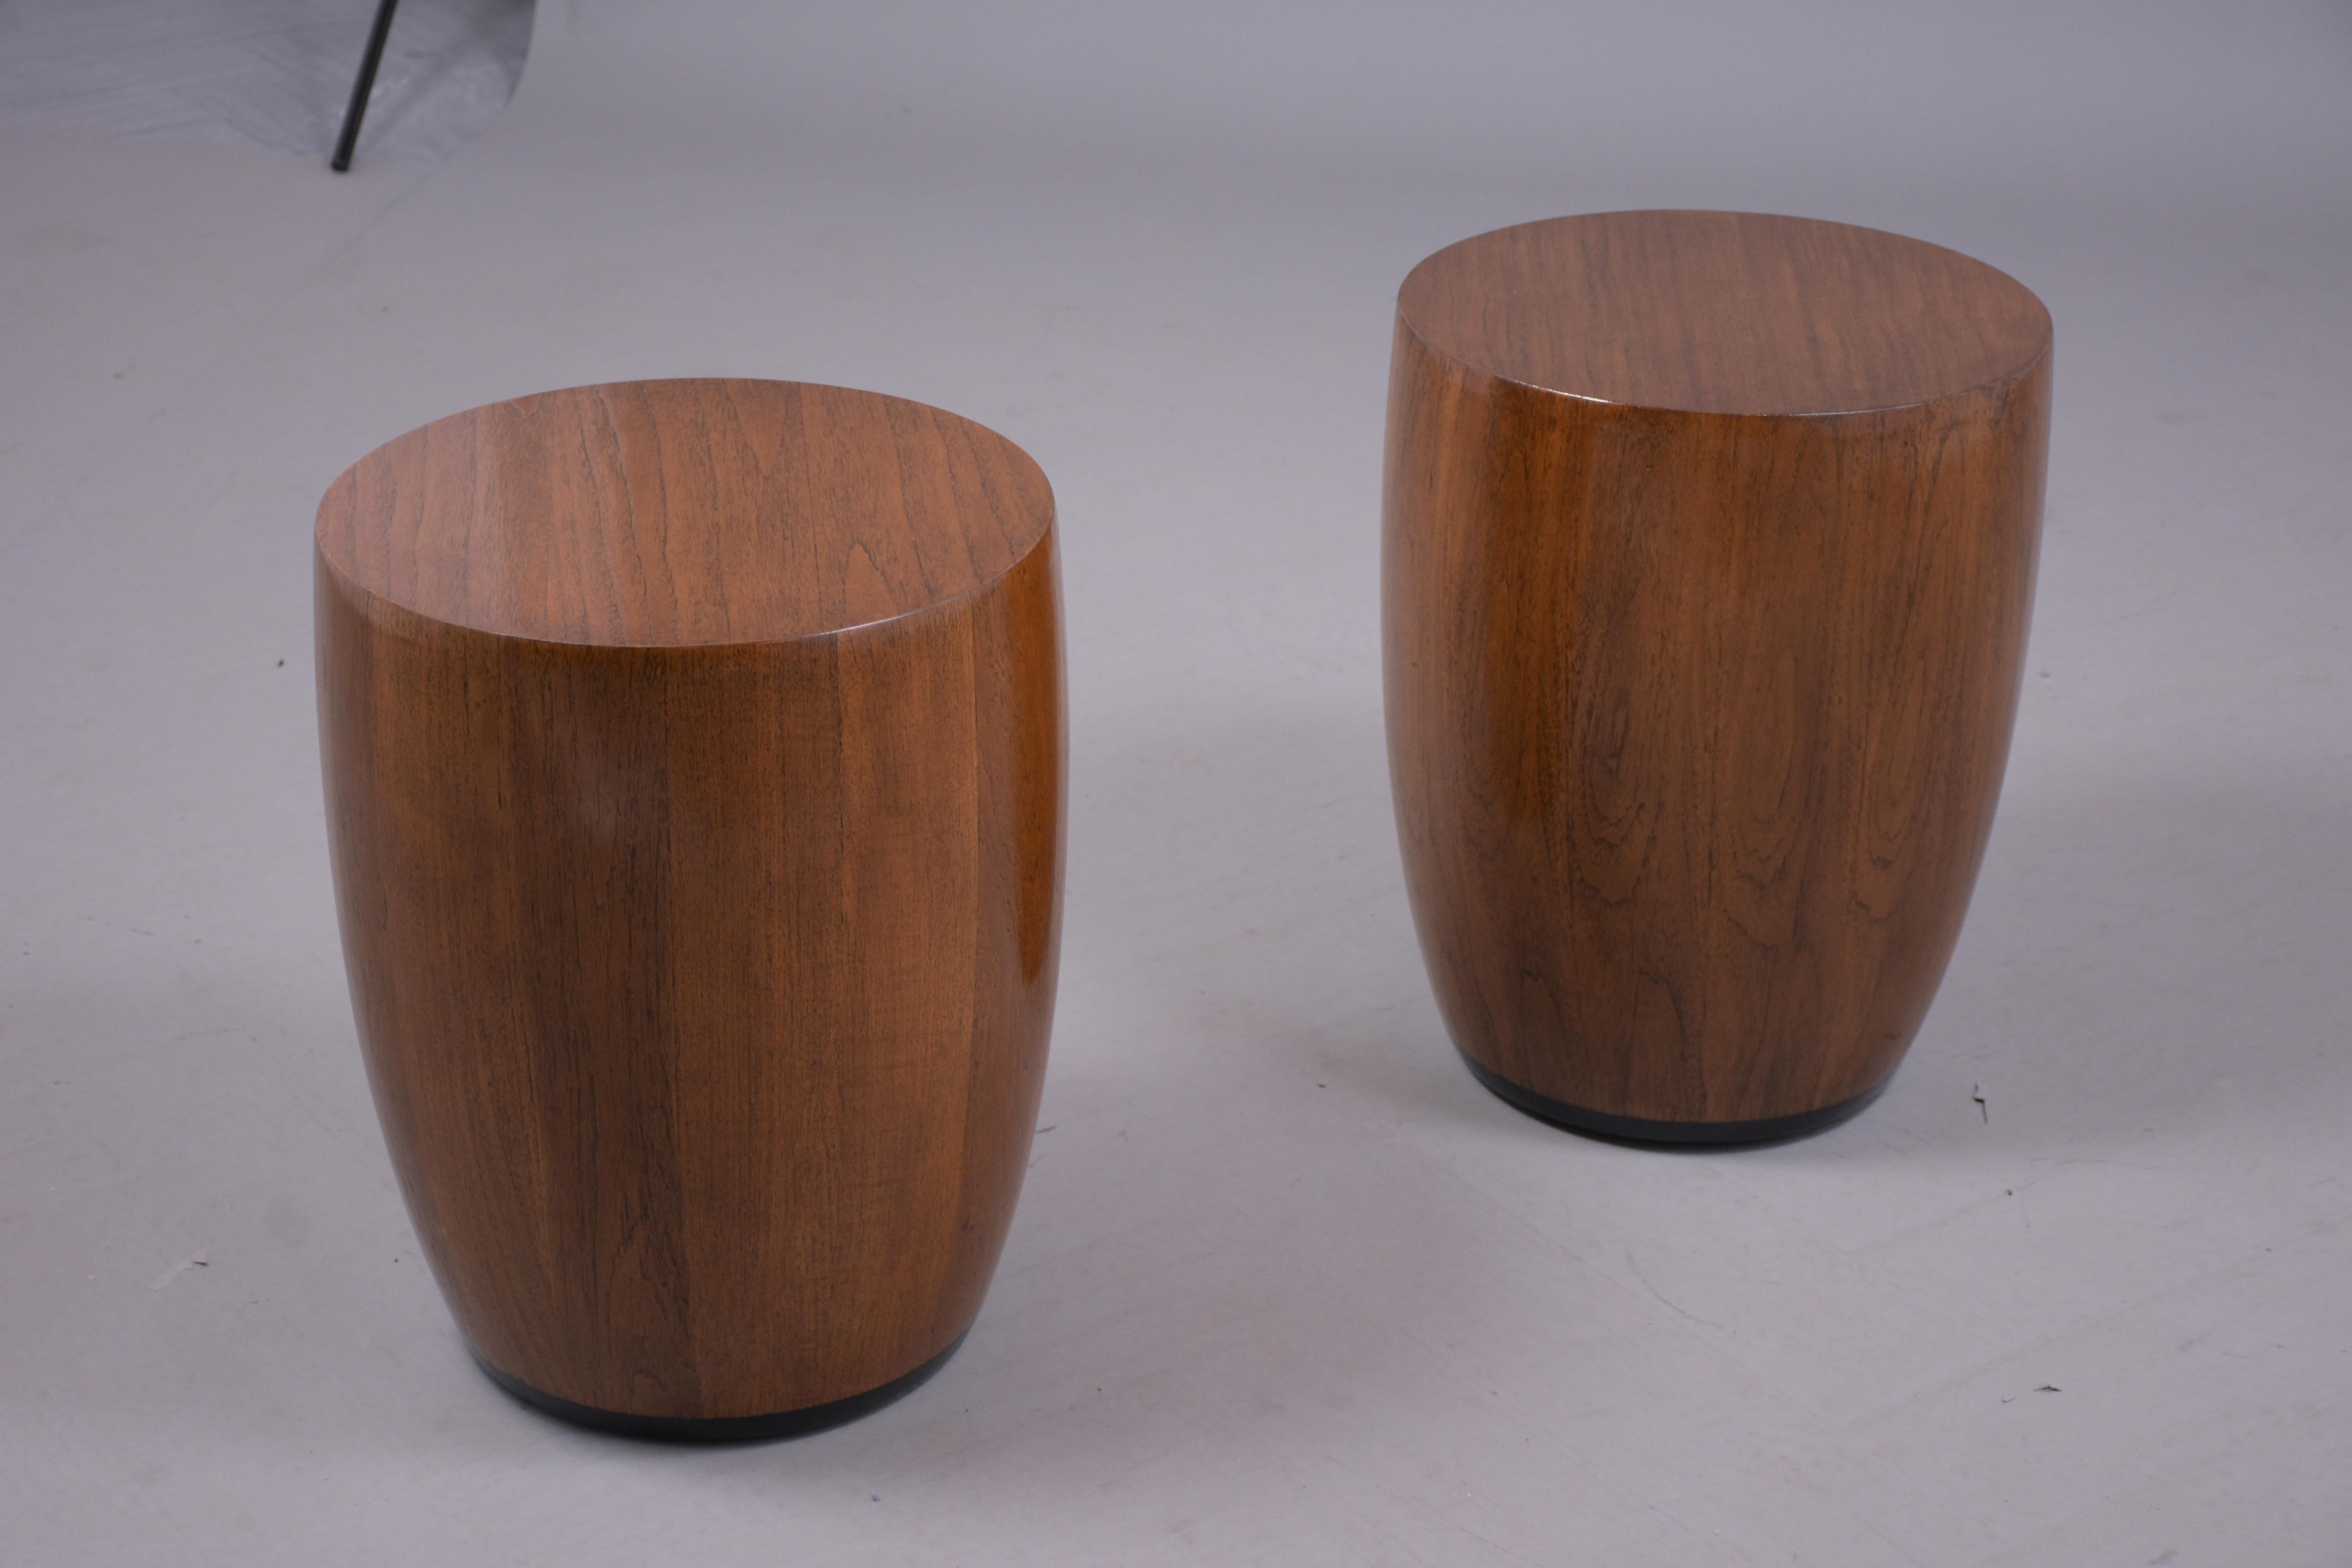 An eye-catching pair of mid-century style mahogany pedestal side tables with a sleek design feature a circular top the pedestals has been newly stained in mahogany & ebonized color combination with a remarkable lacquered finish. These fabulous pair